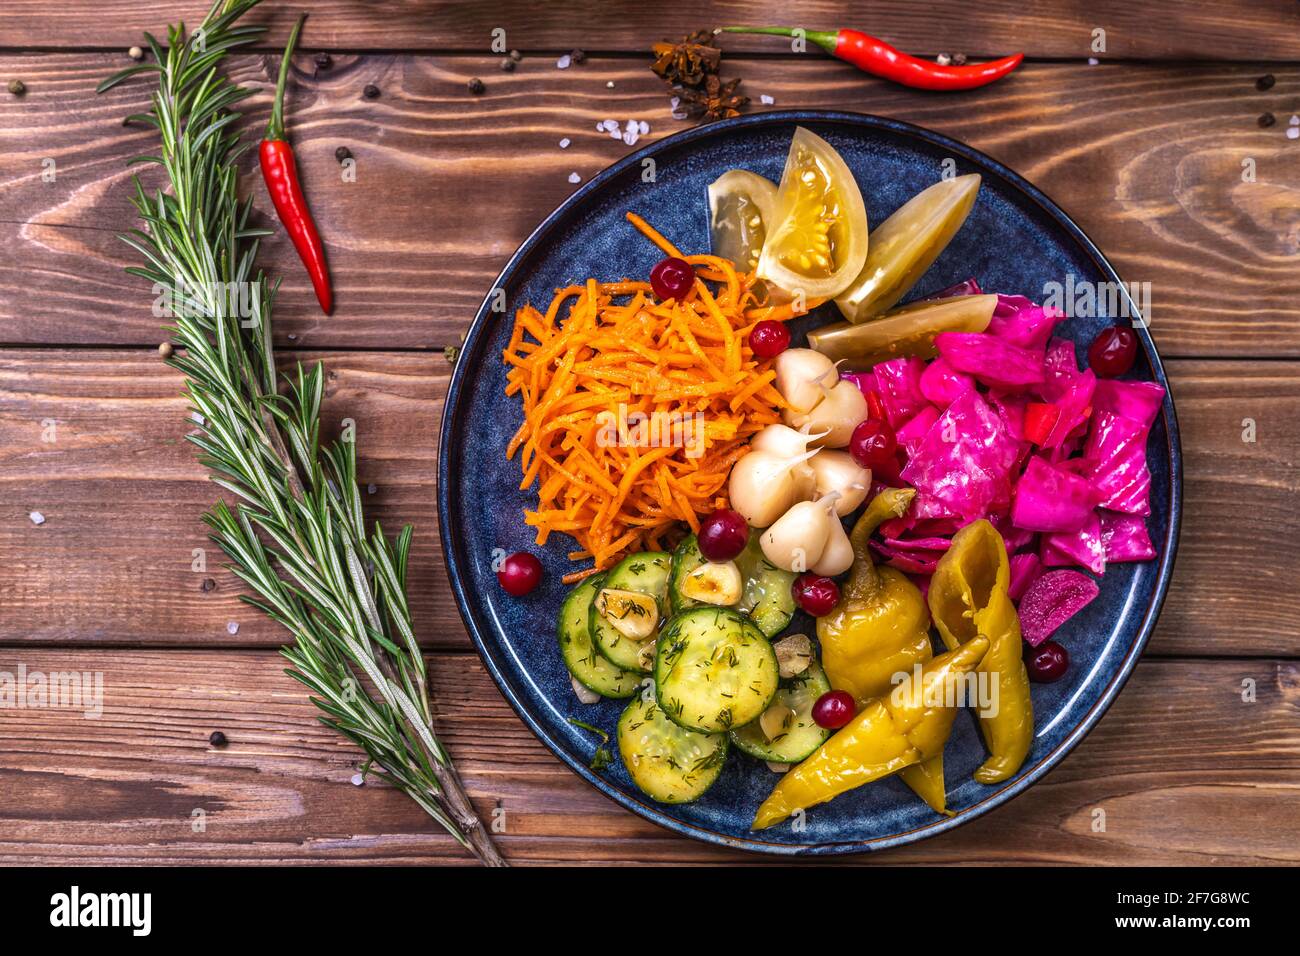 Pickled vegetables: peppers, carrots, garlic, cabbage lie on a platter on a wooden background decorated with chili pepper, rosemary. The concept of he Stock Photo